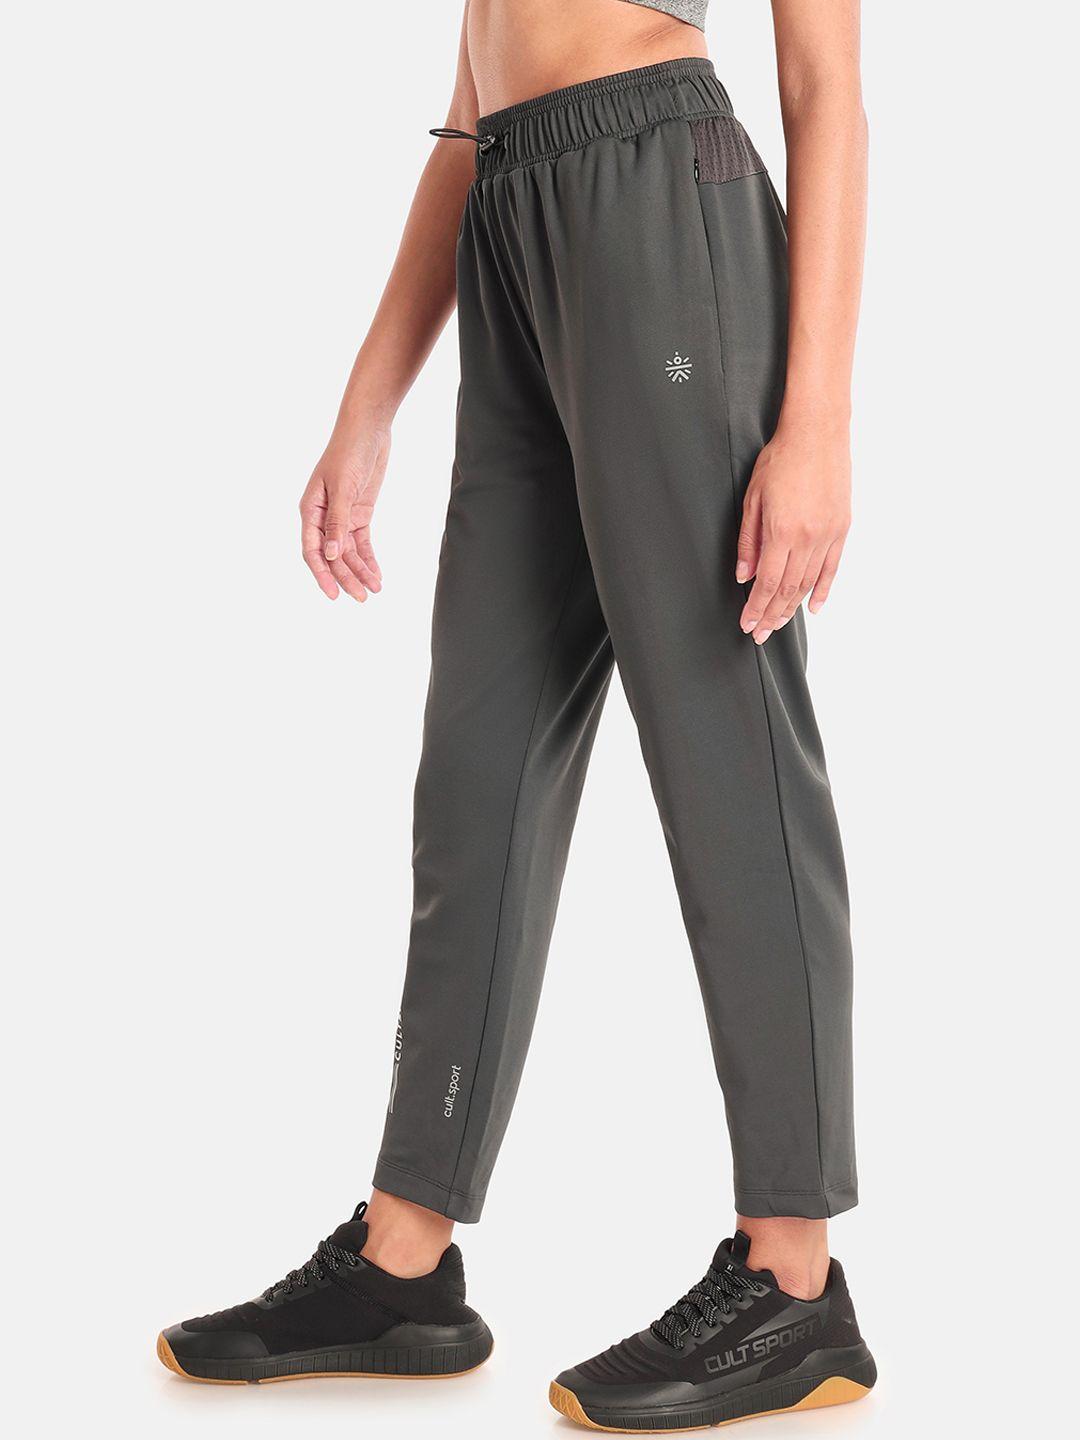 Cultsport Women Slim-Fit Fly Dry Running Track Pants